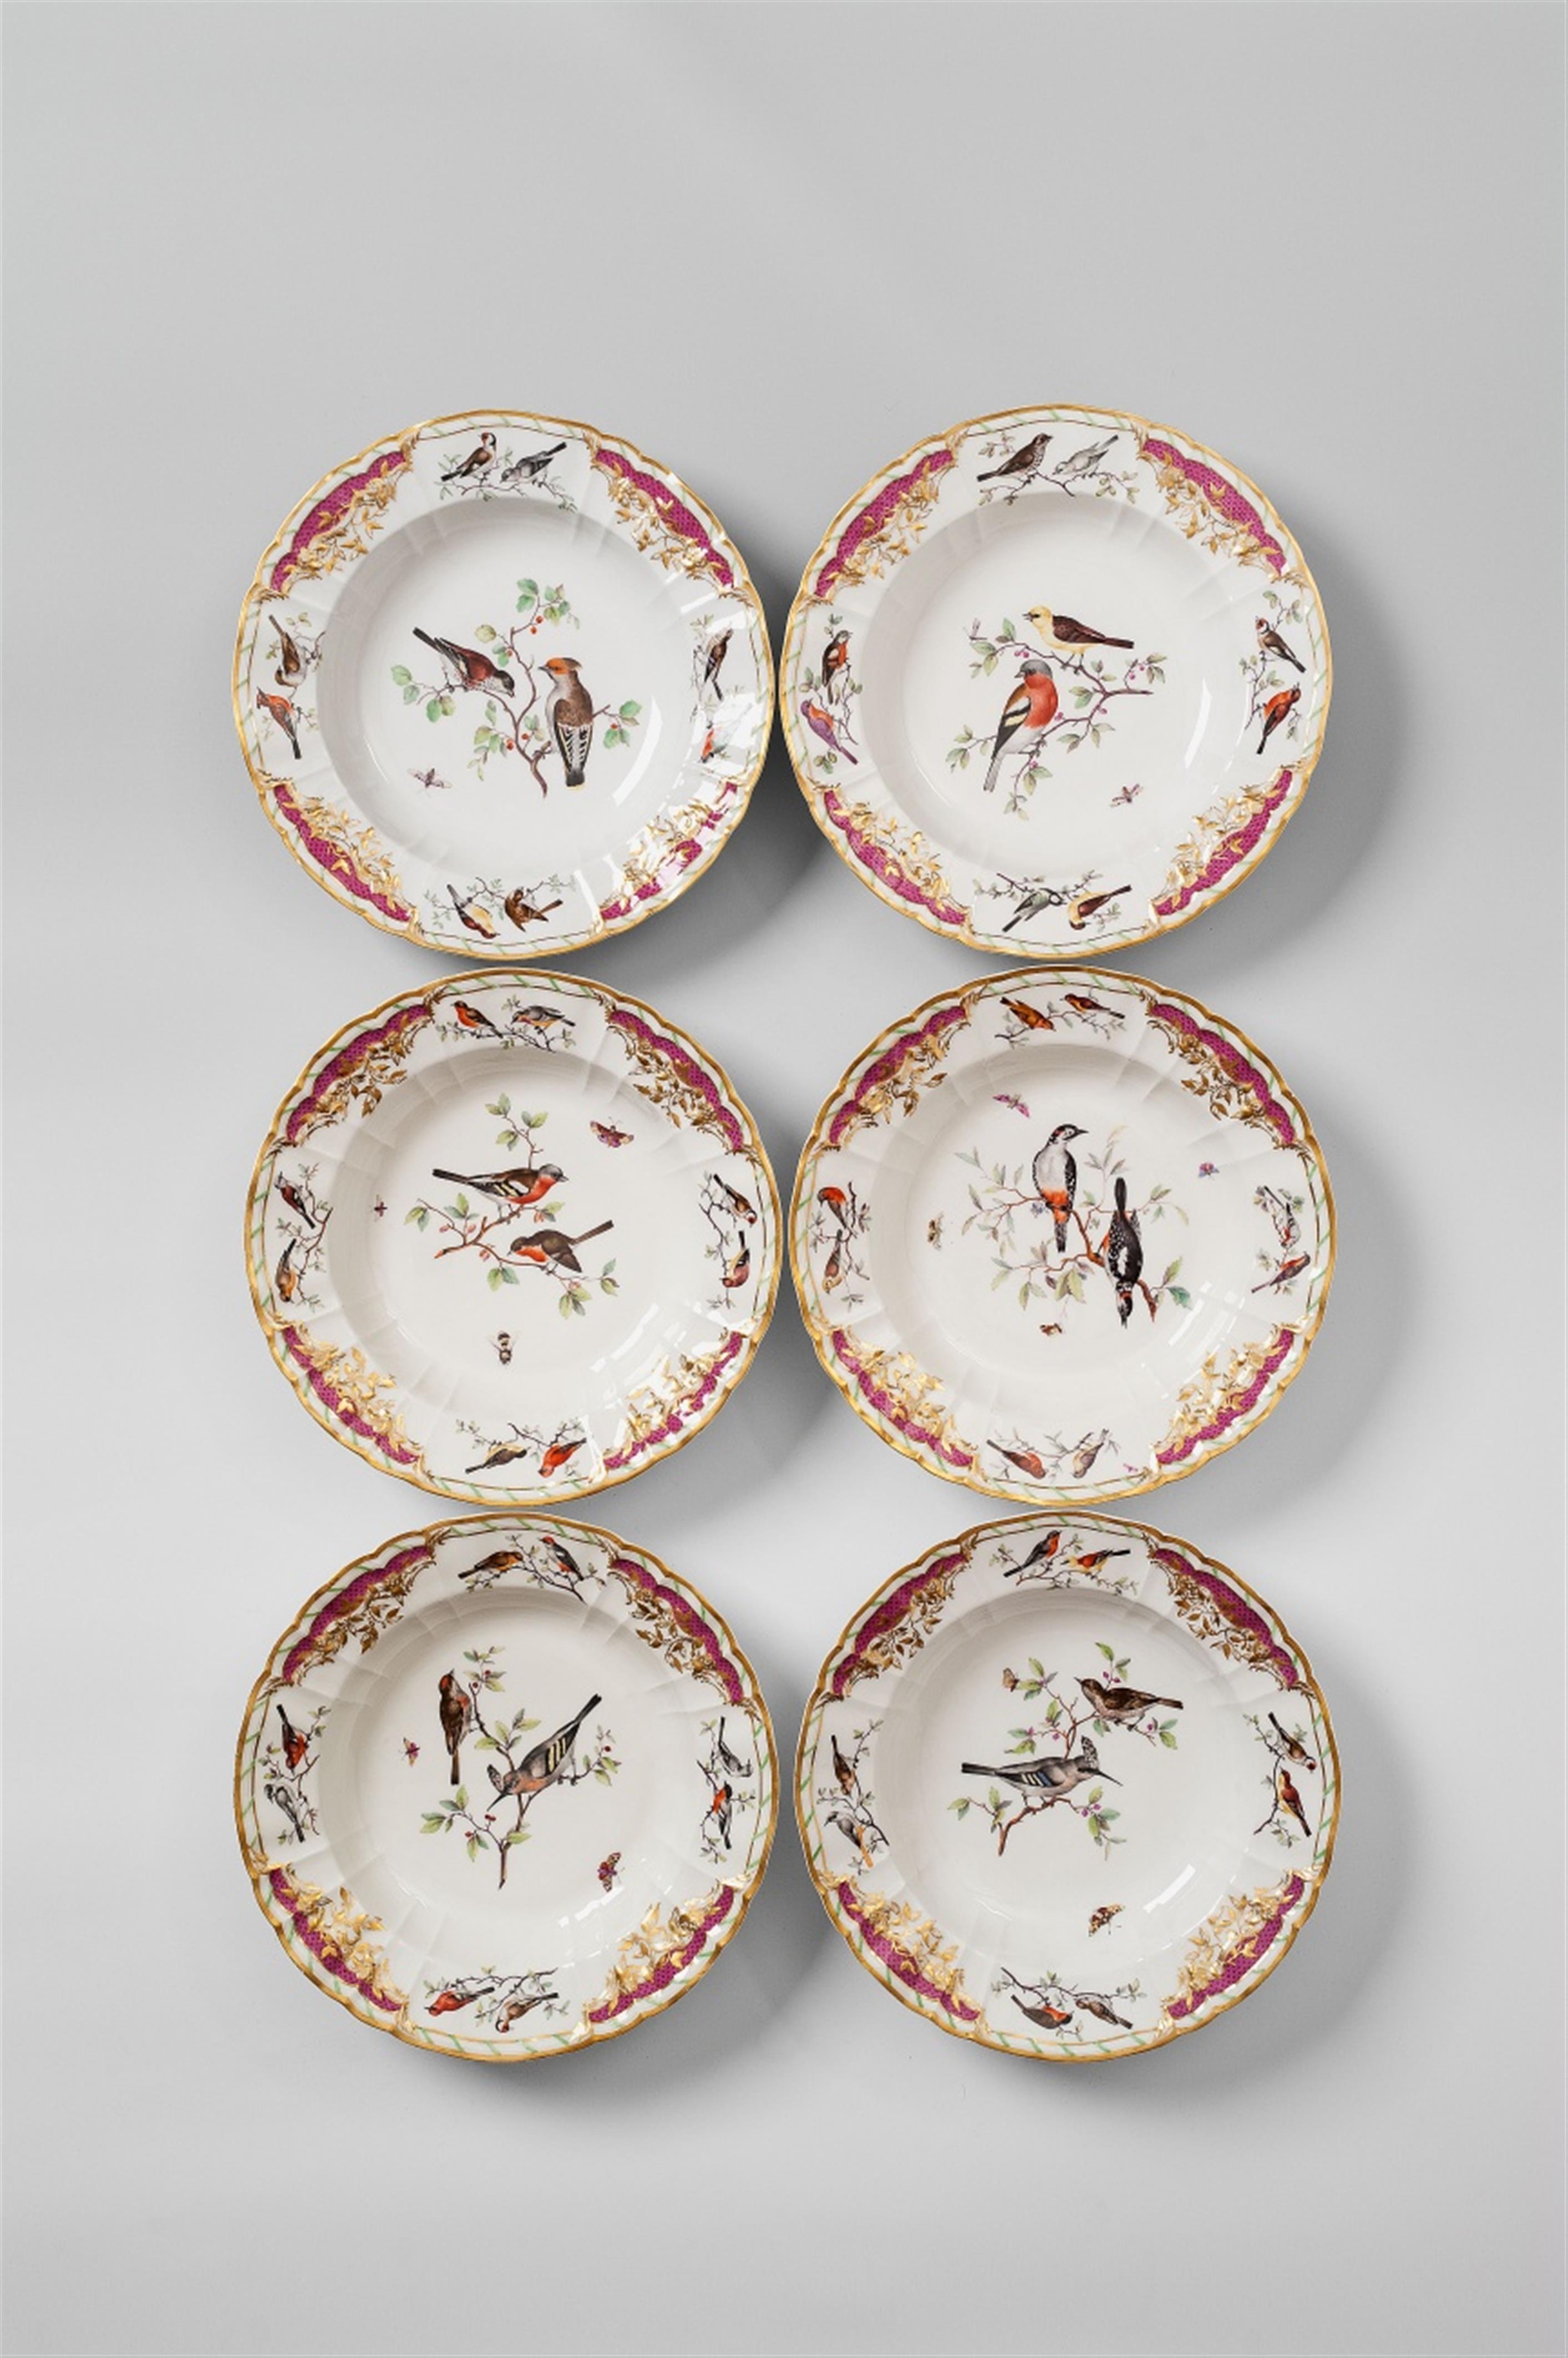 Six Berlin KPM porcelain soup dishes made for Count Rothenburg - image-1